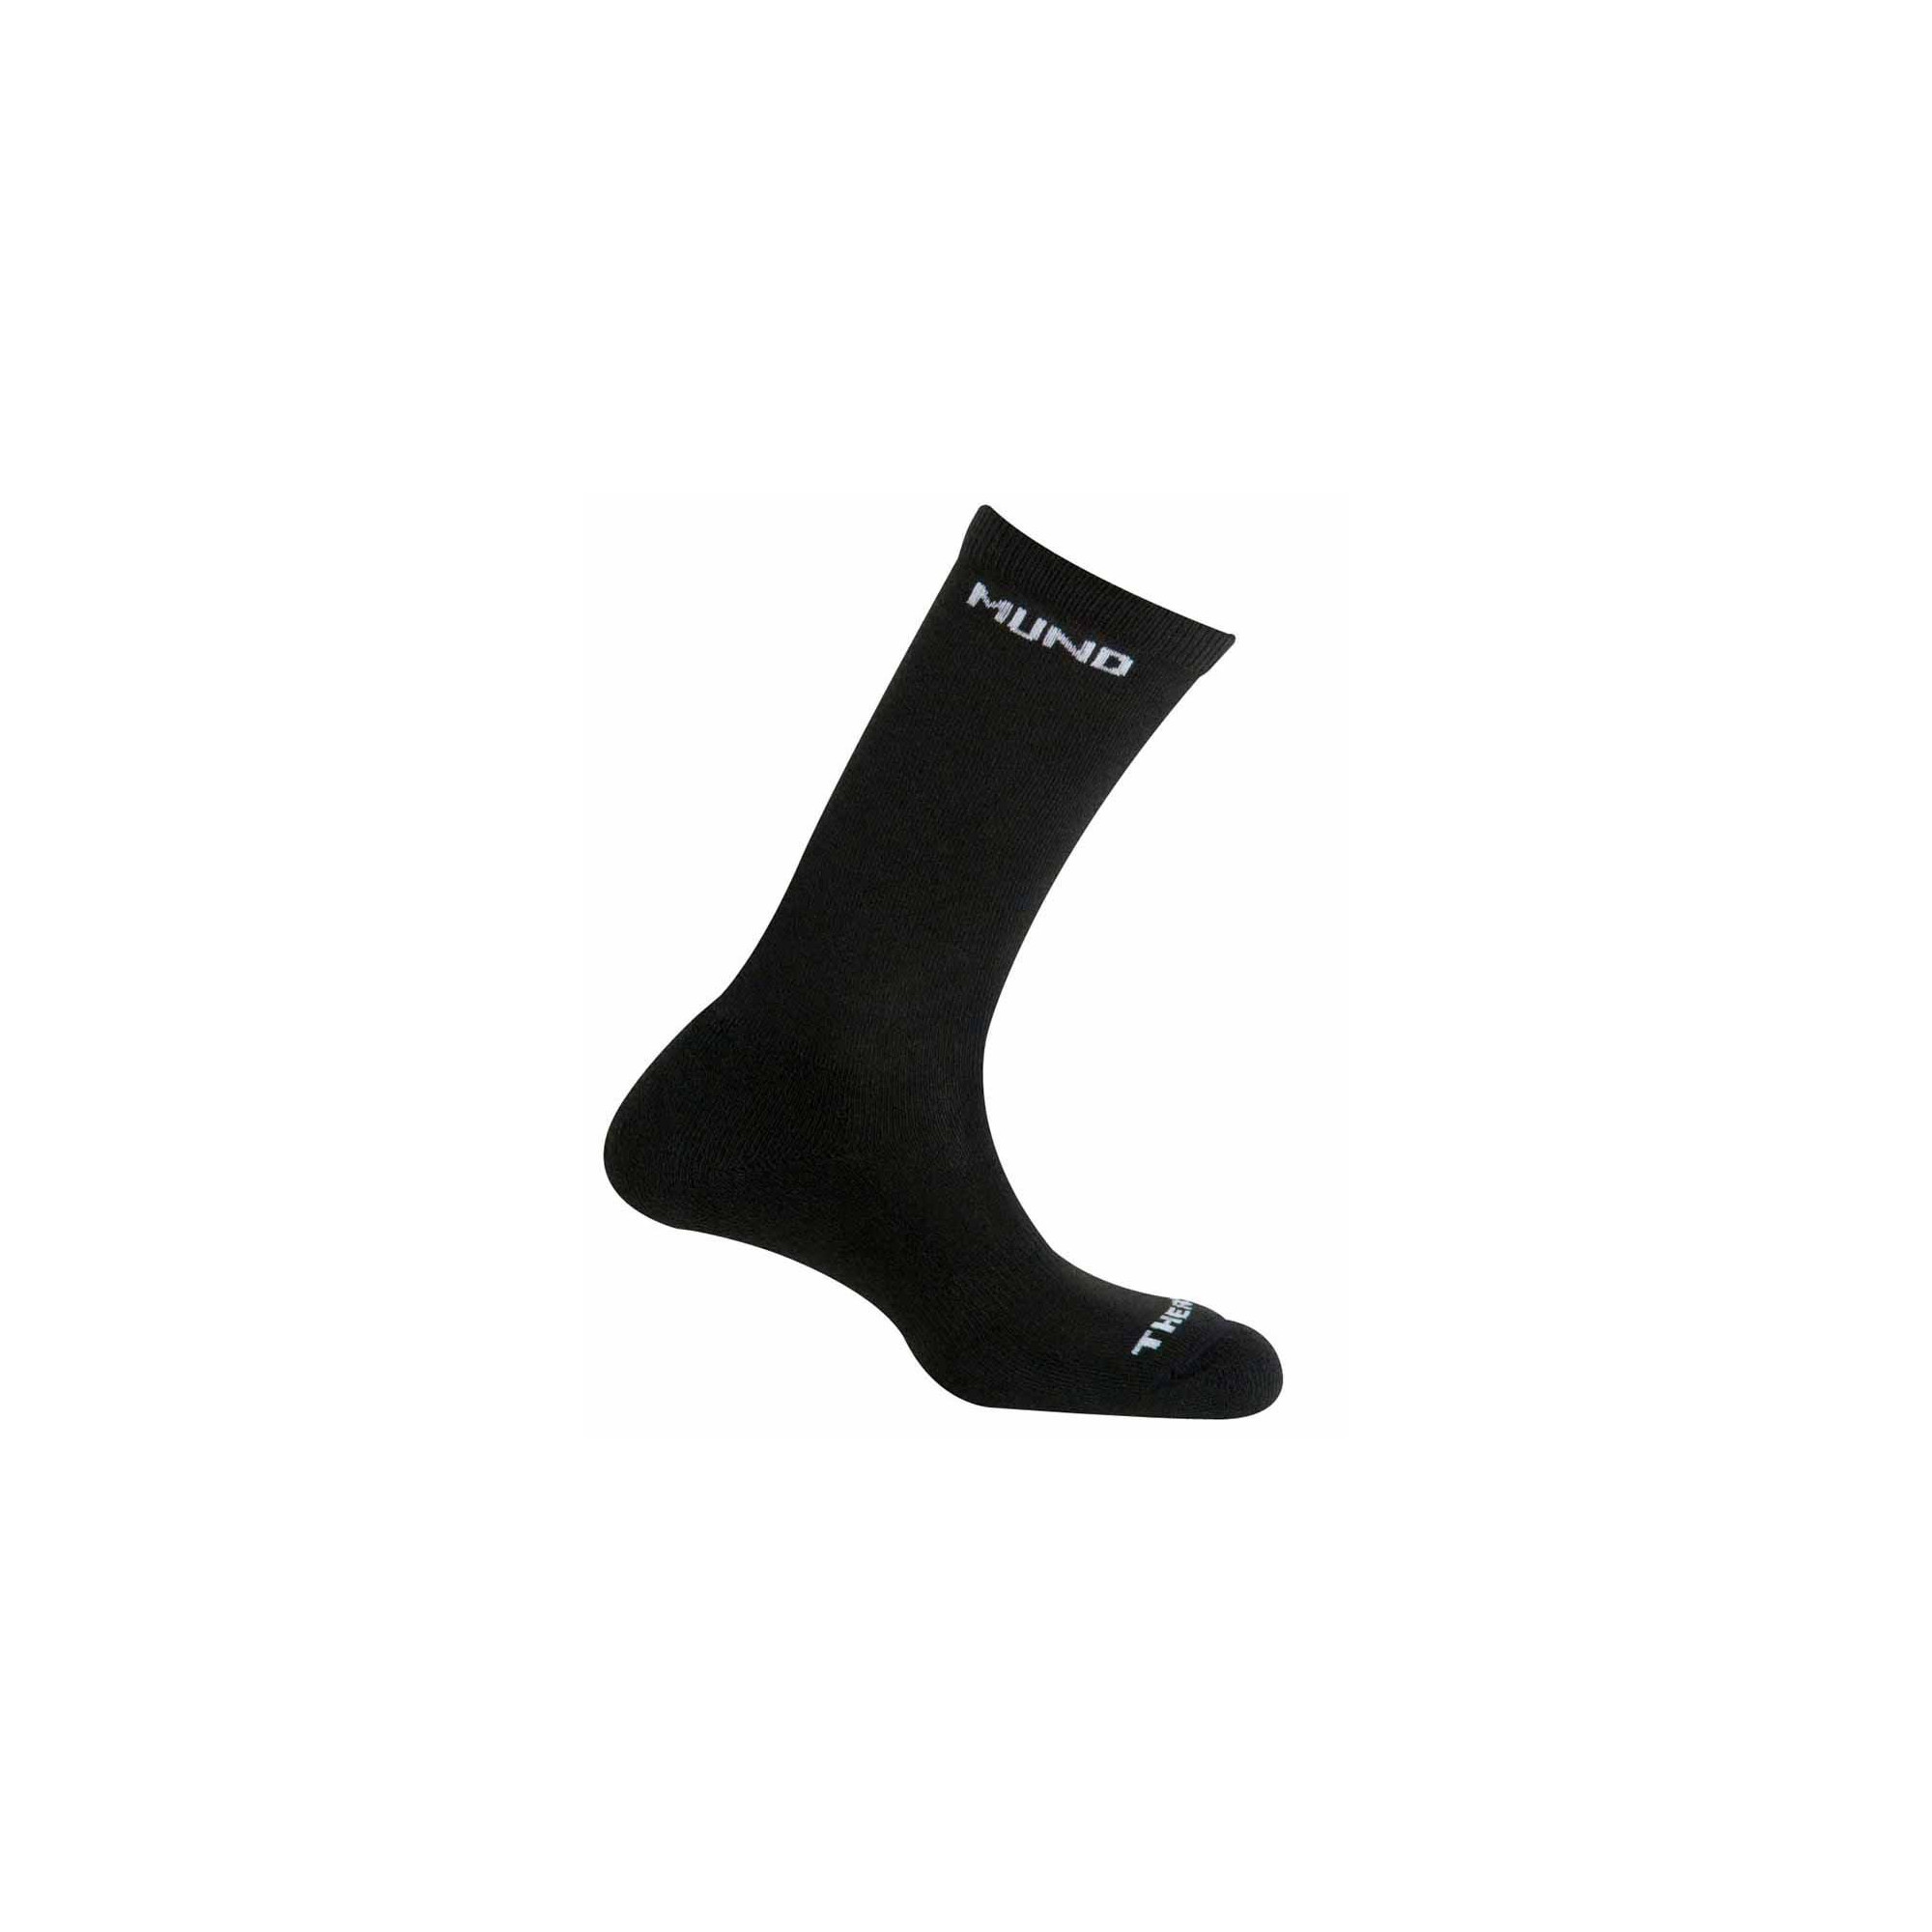 Rywan - Chaussette polaire - Chaussettes outdoor hiver - Inuka